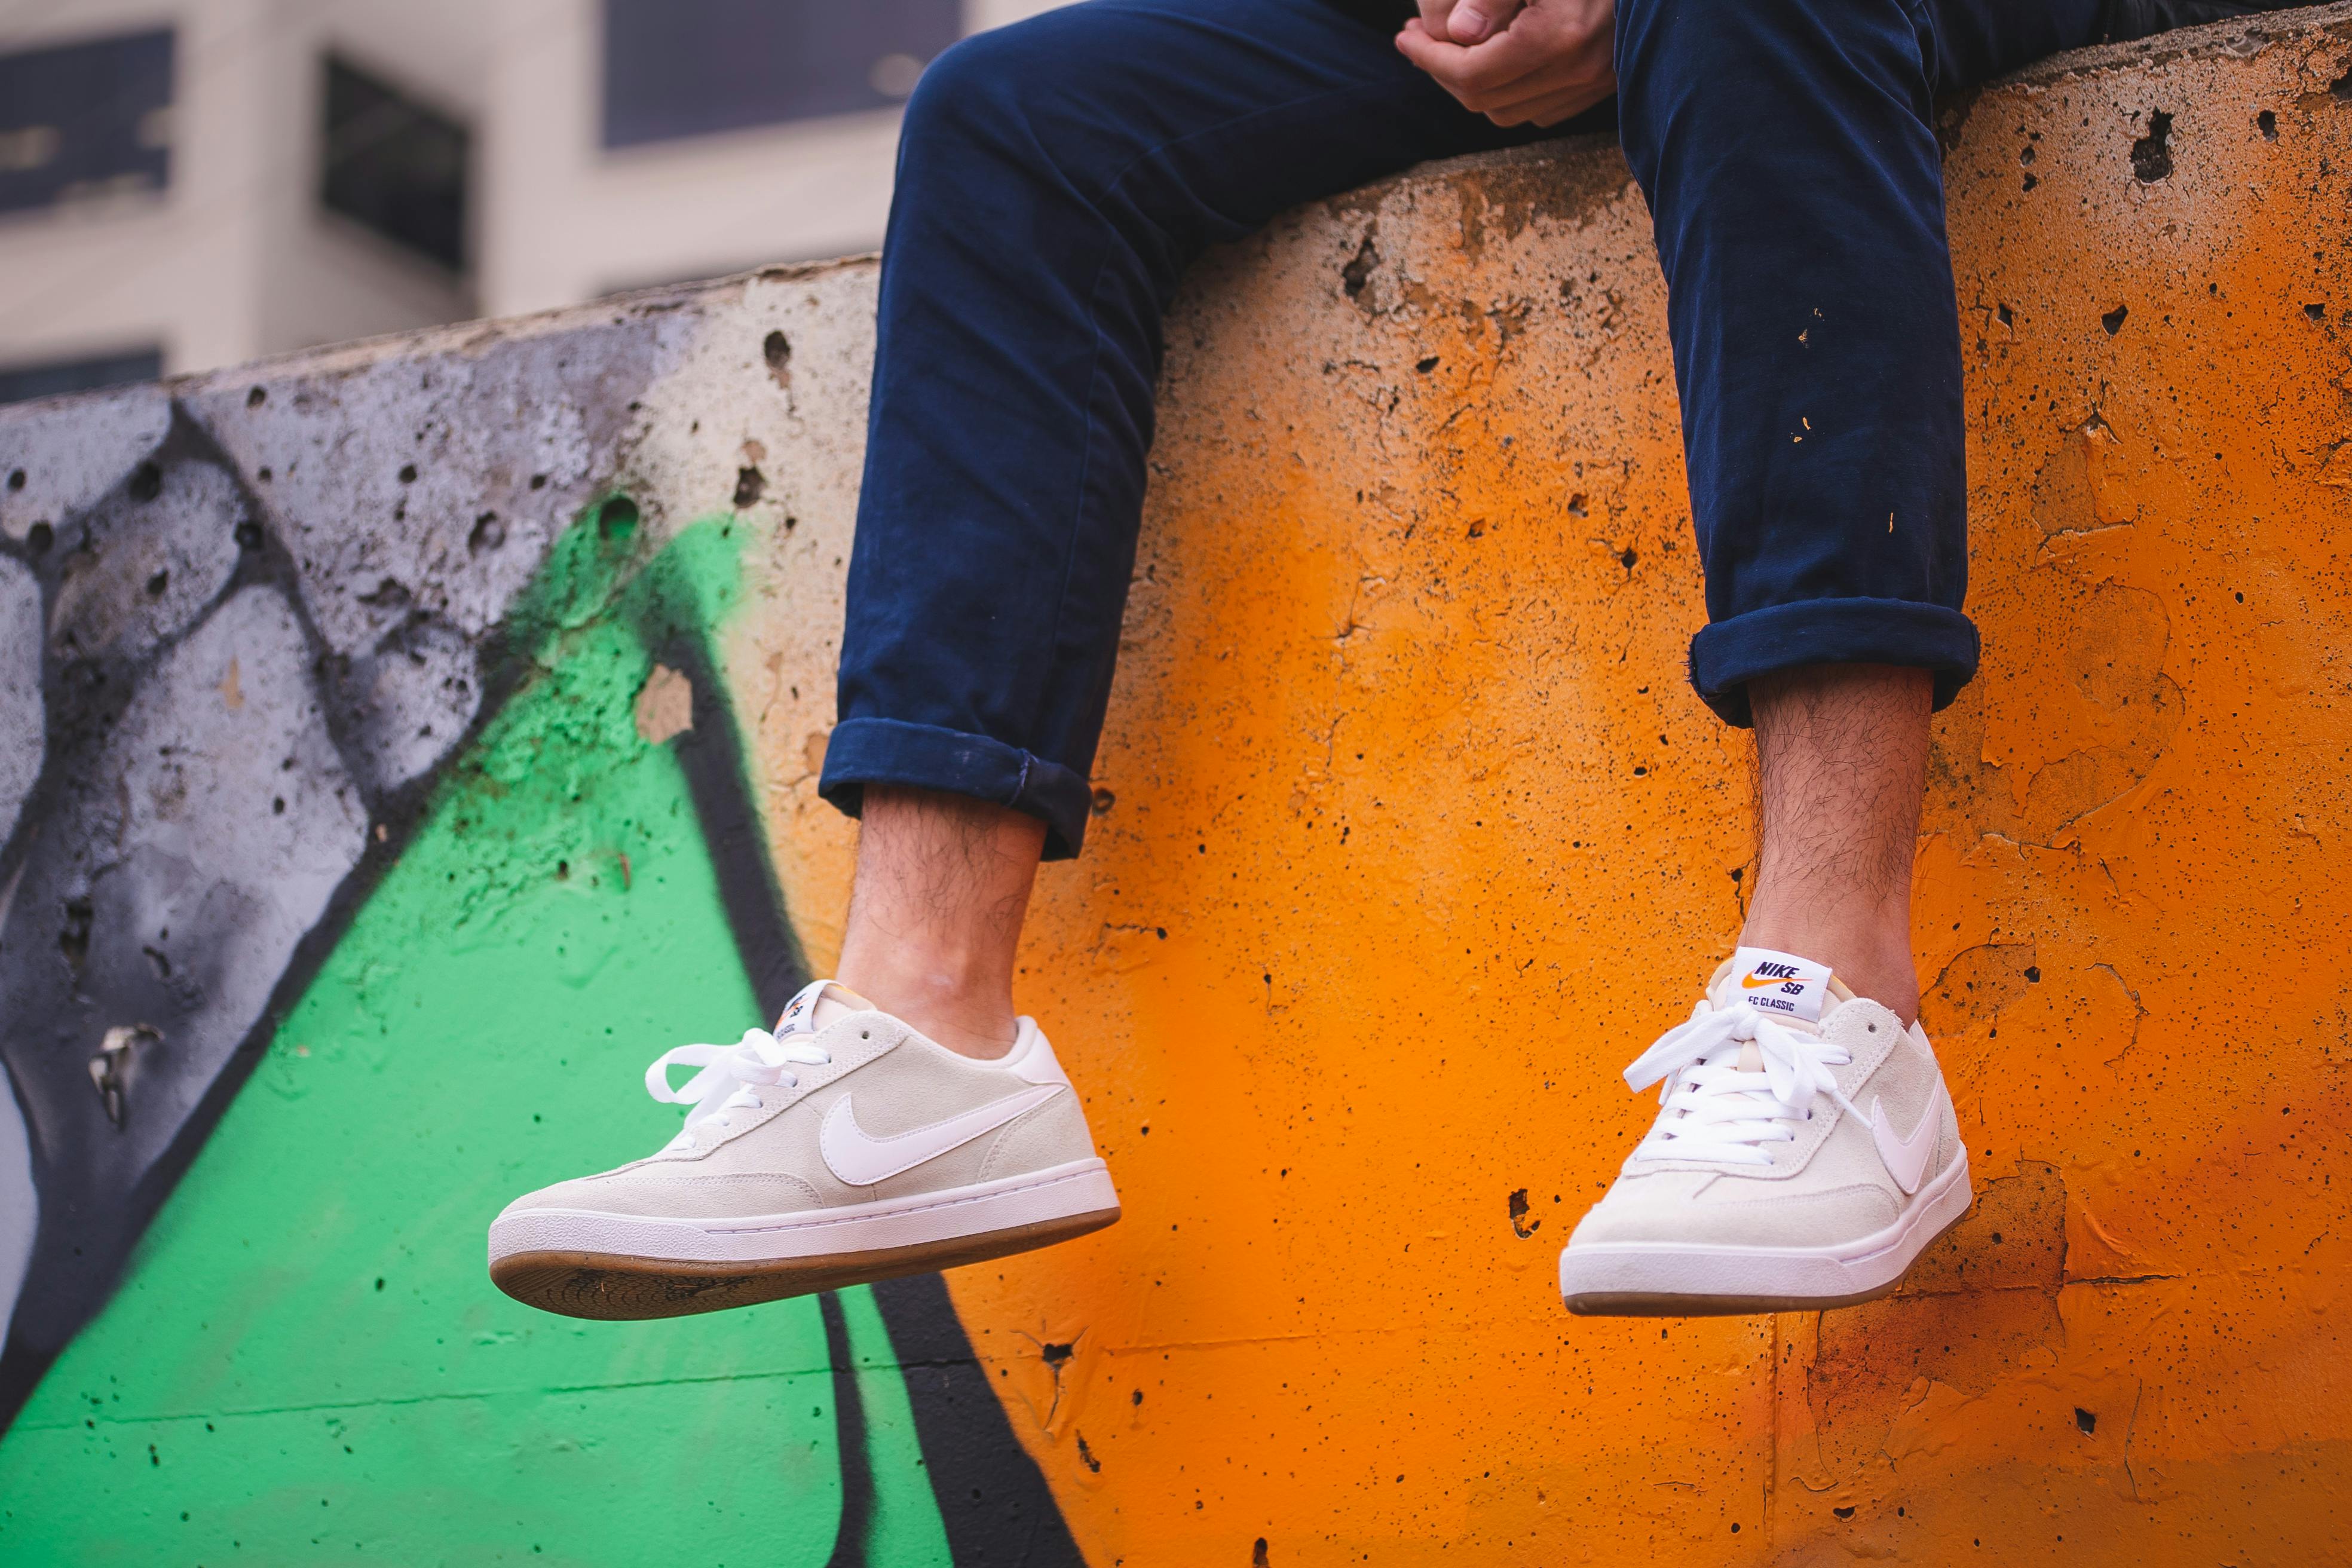 Person in blue denim jeans and black and white nike sneakers photo – Free  Shoe Image on Unsplash